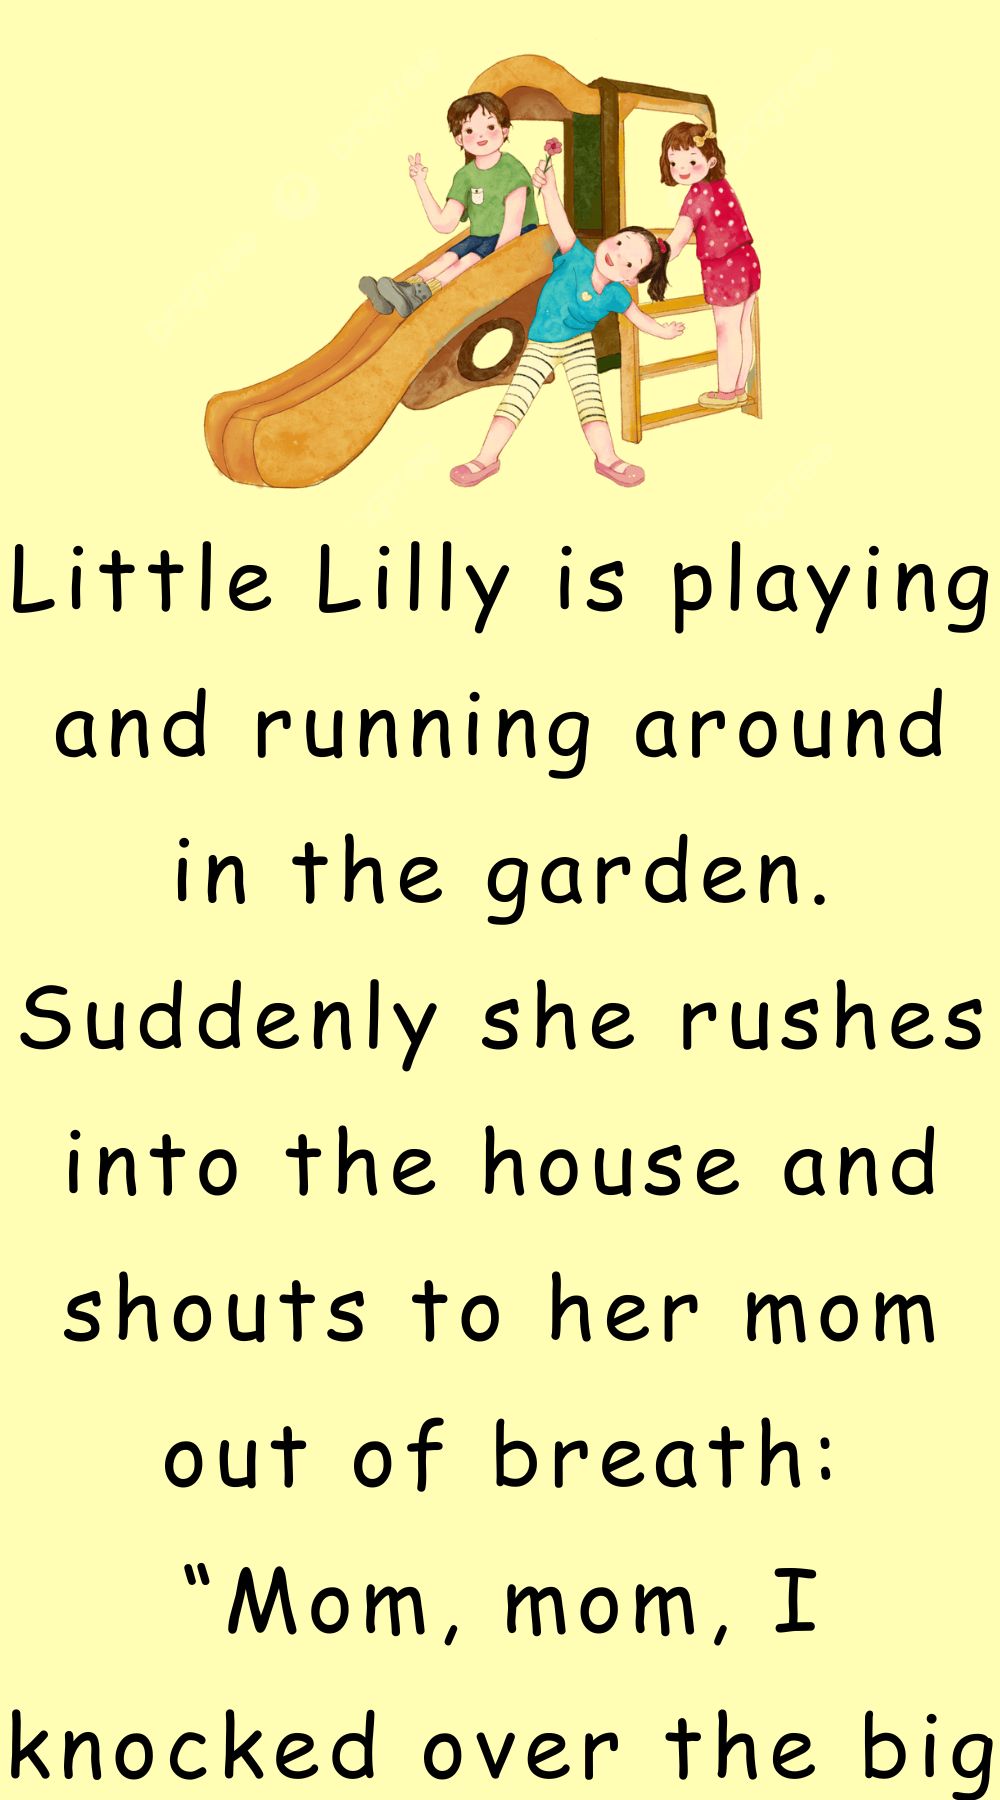 Little Lilly is playing and running around in the garden